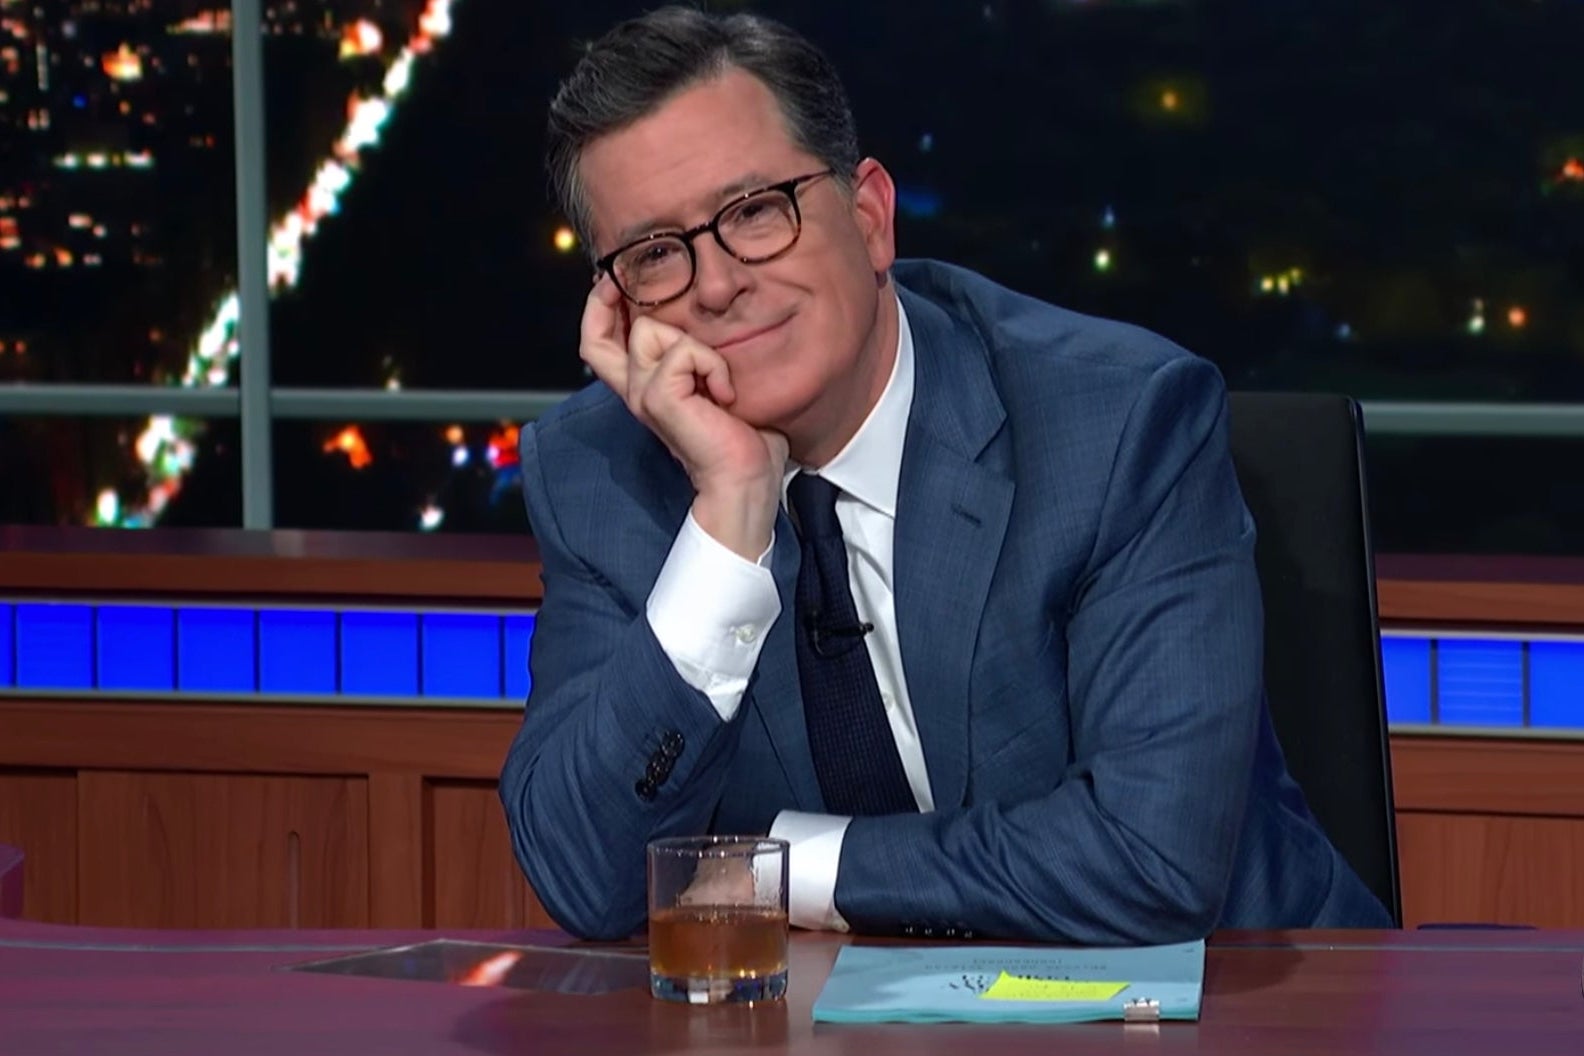 Stephen Colbert sits at his Late Show desk, a glass of Scotch and a script in front of him.